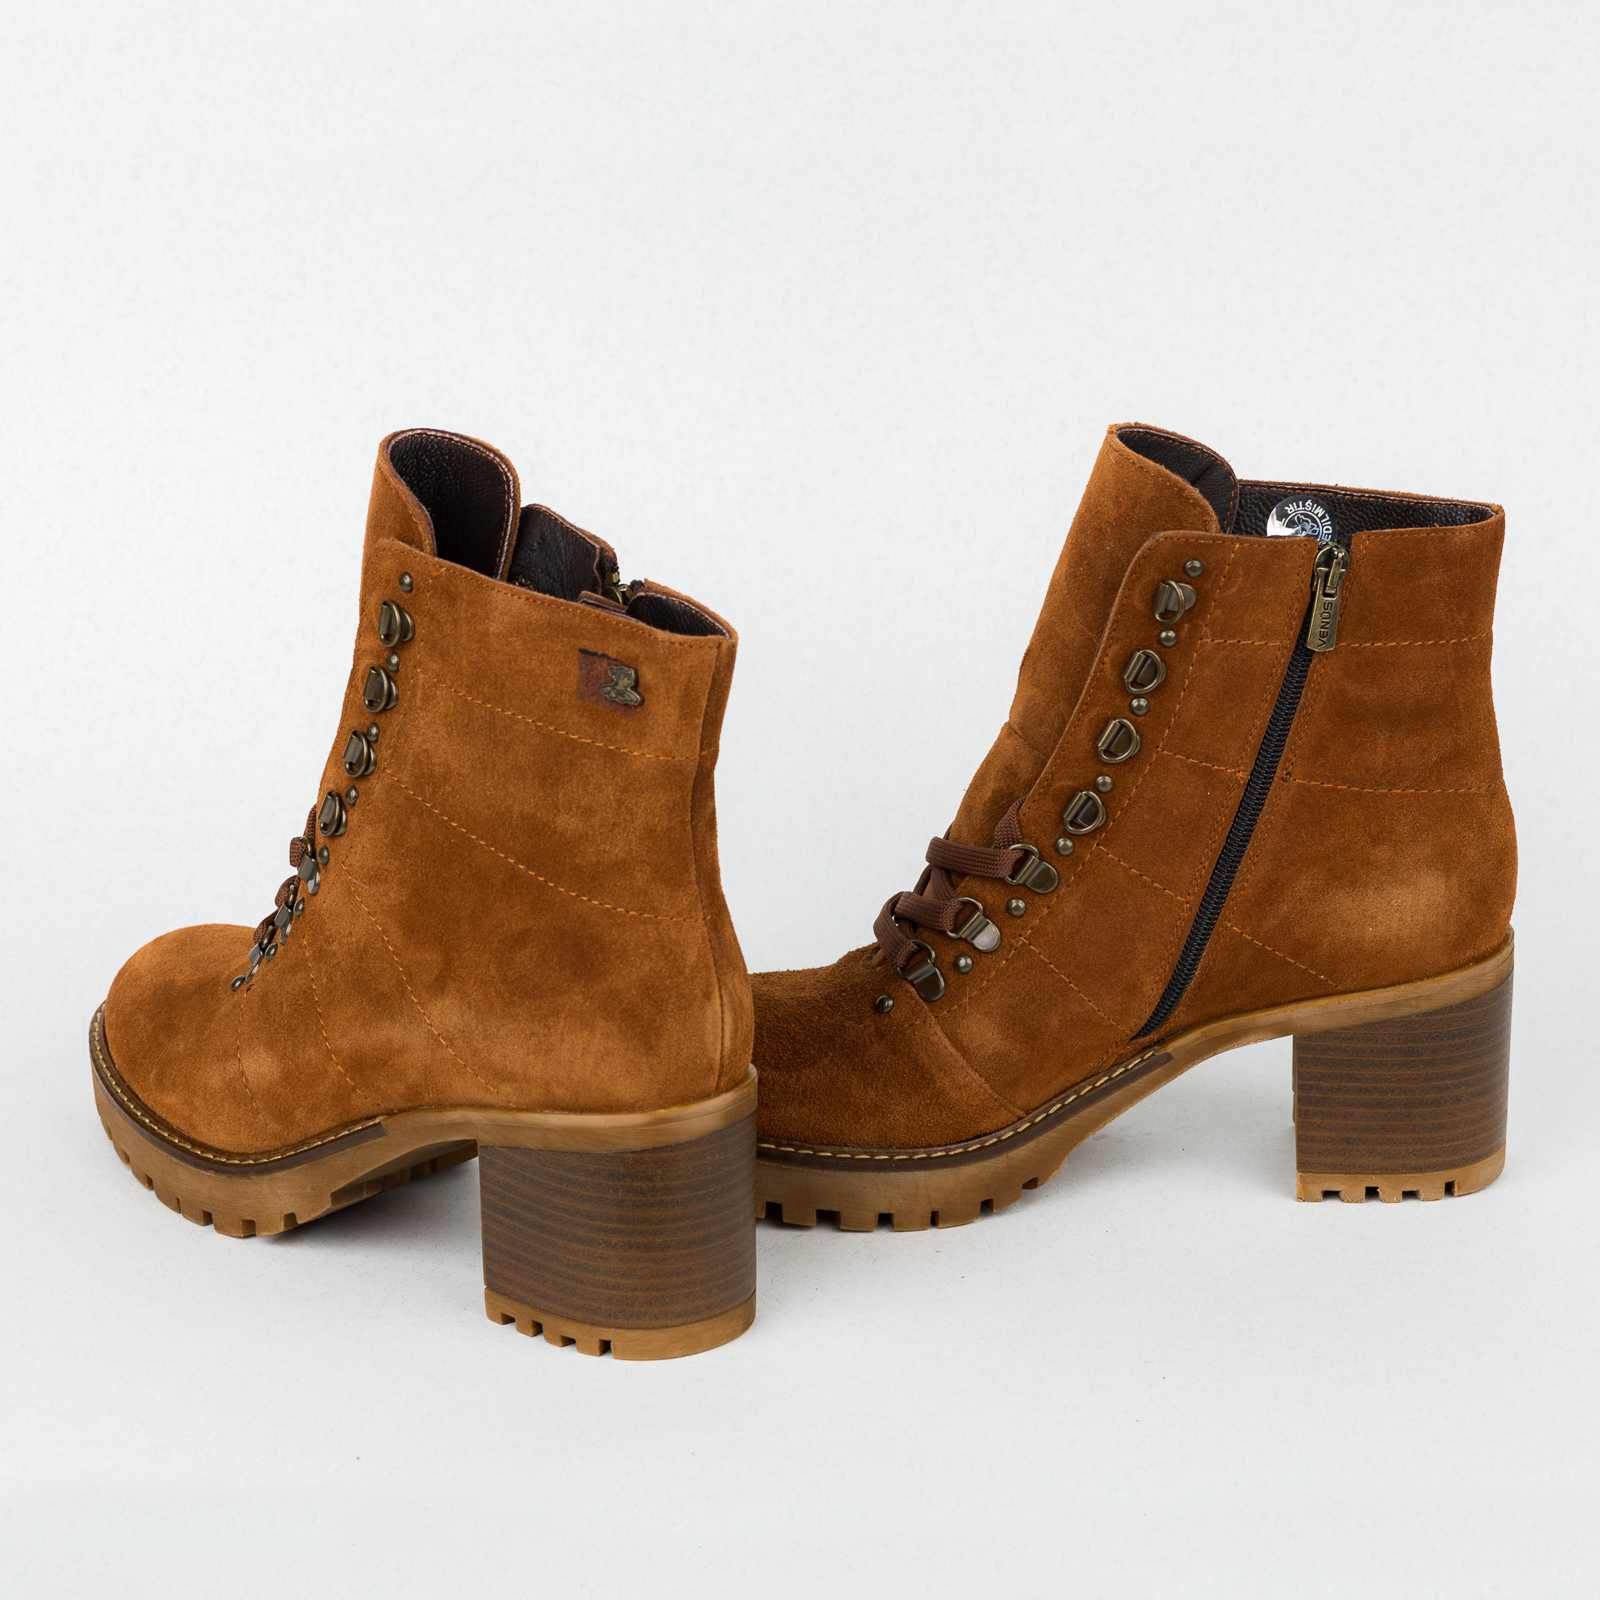 Leather ankle boots B434 - CAMEL